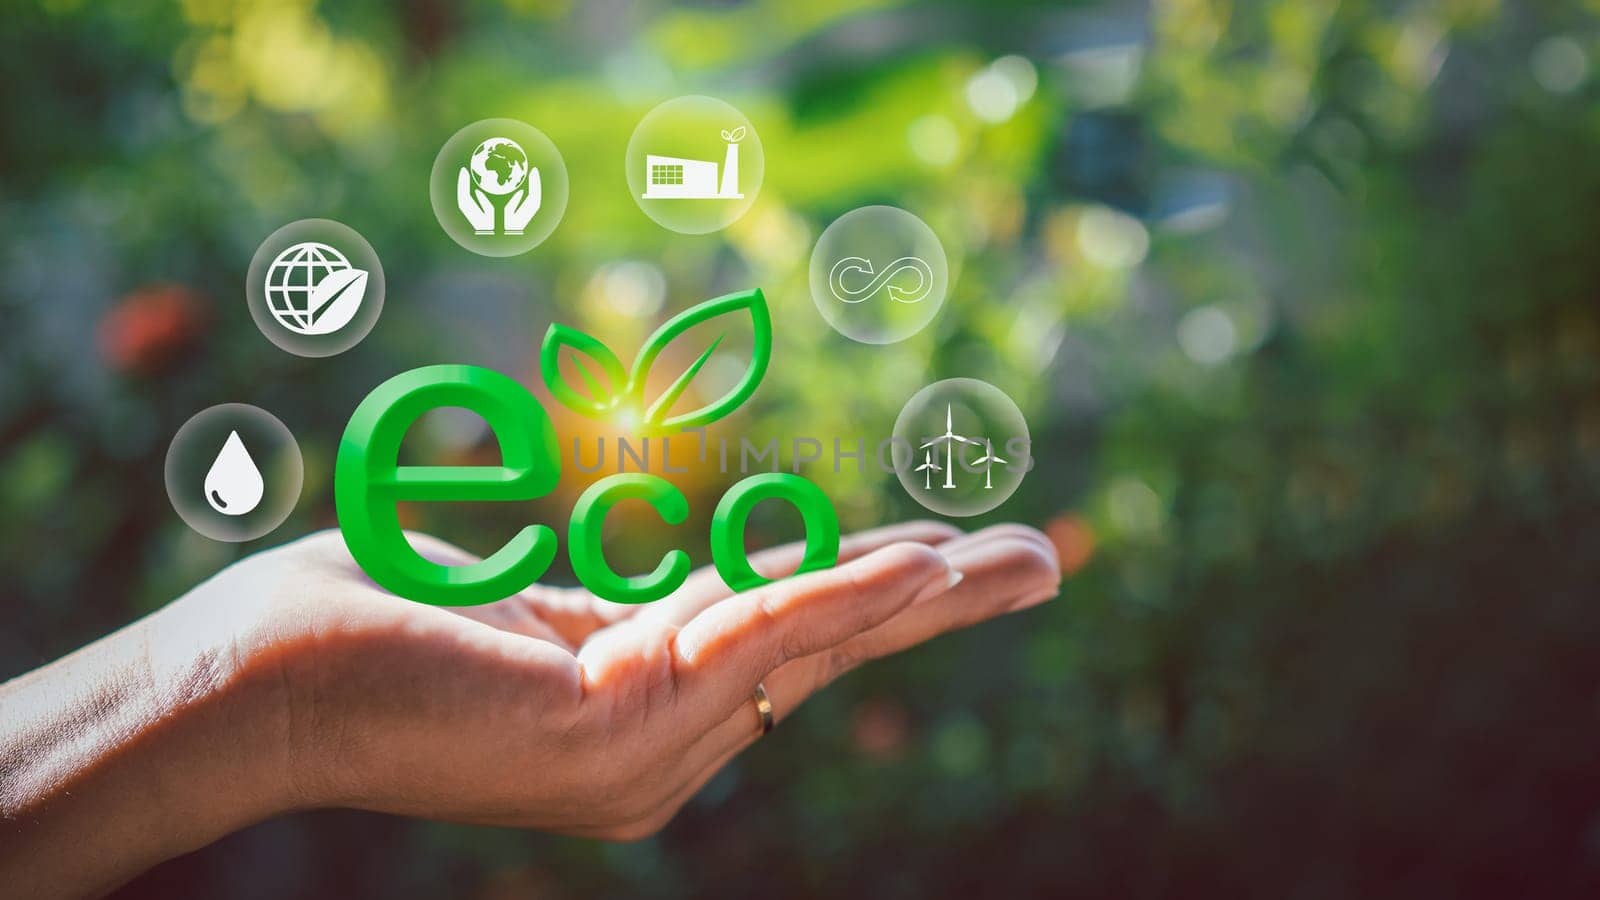 The concept of doing business for the environment. Creating a clean and friendly environment without emitting carbon dioxide. Planting trees to reduce CO2 emissions, the concept of environmental protection, environment, society and governance. sustainable global environment concept